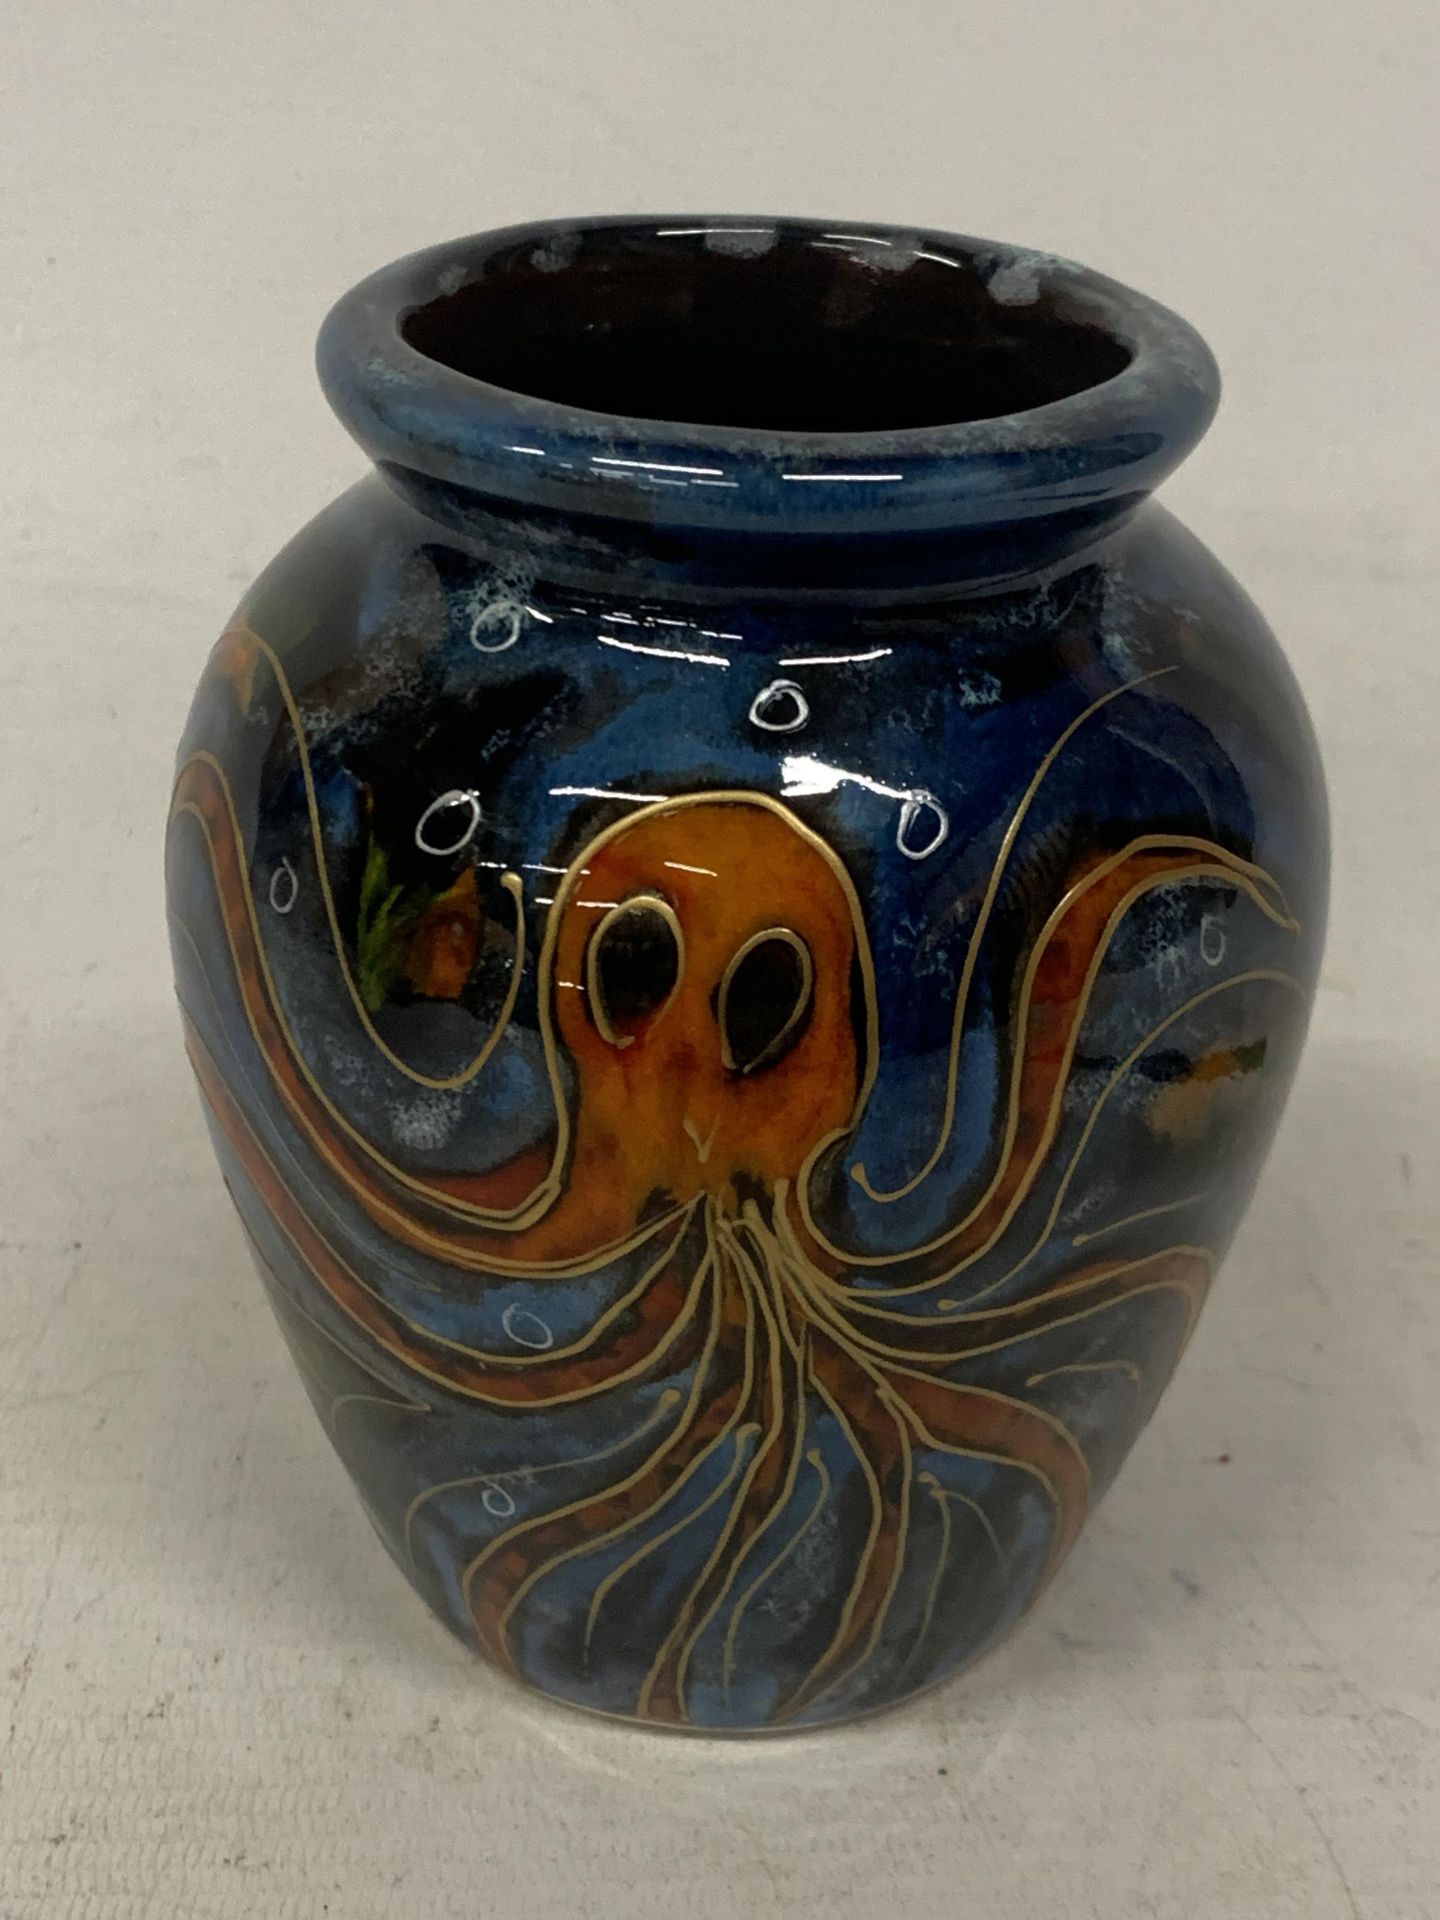 AN ANITA HARRIS HAND PAINTED AND SIGNED IN GOLD OCTOPUS VASE